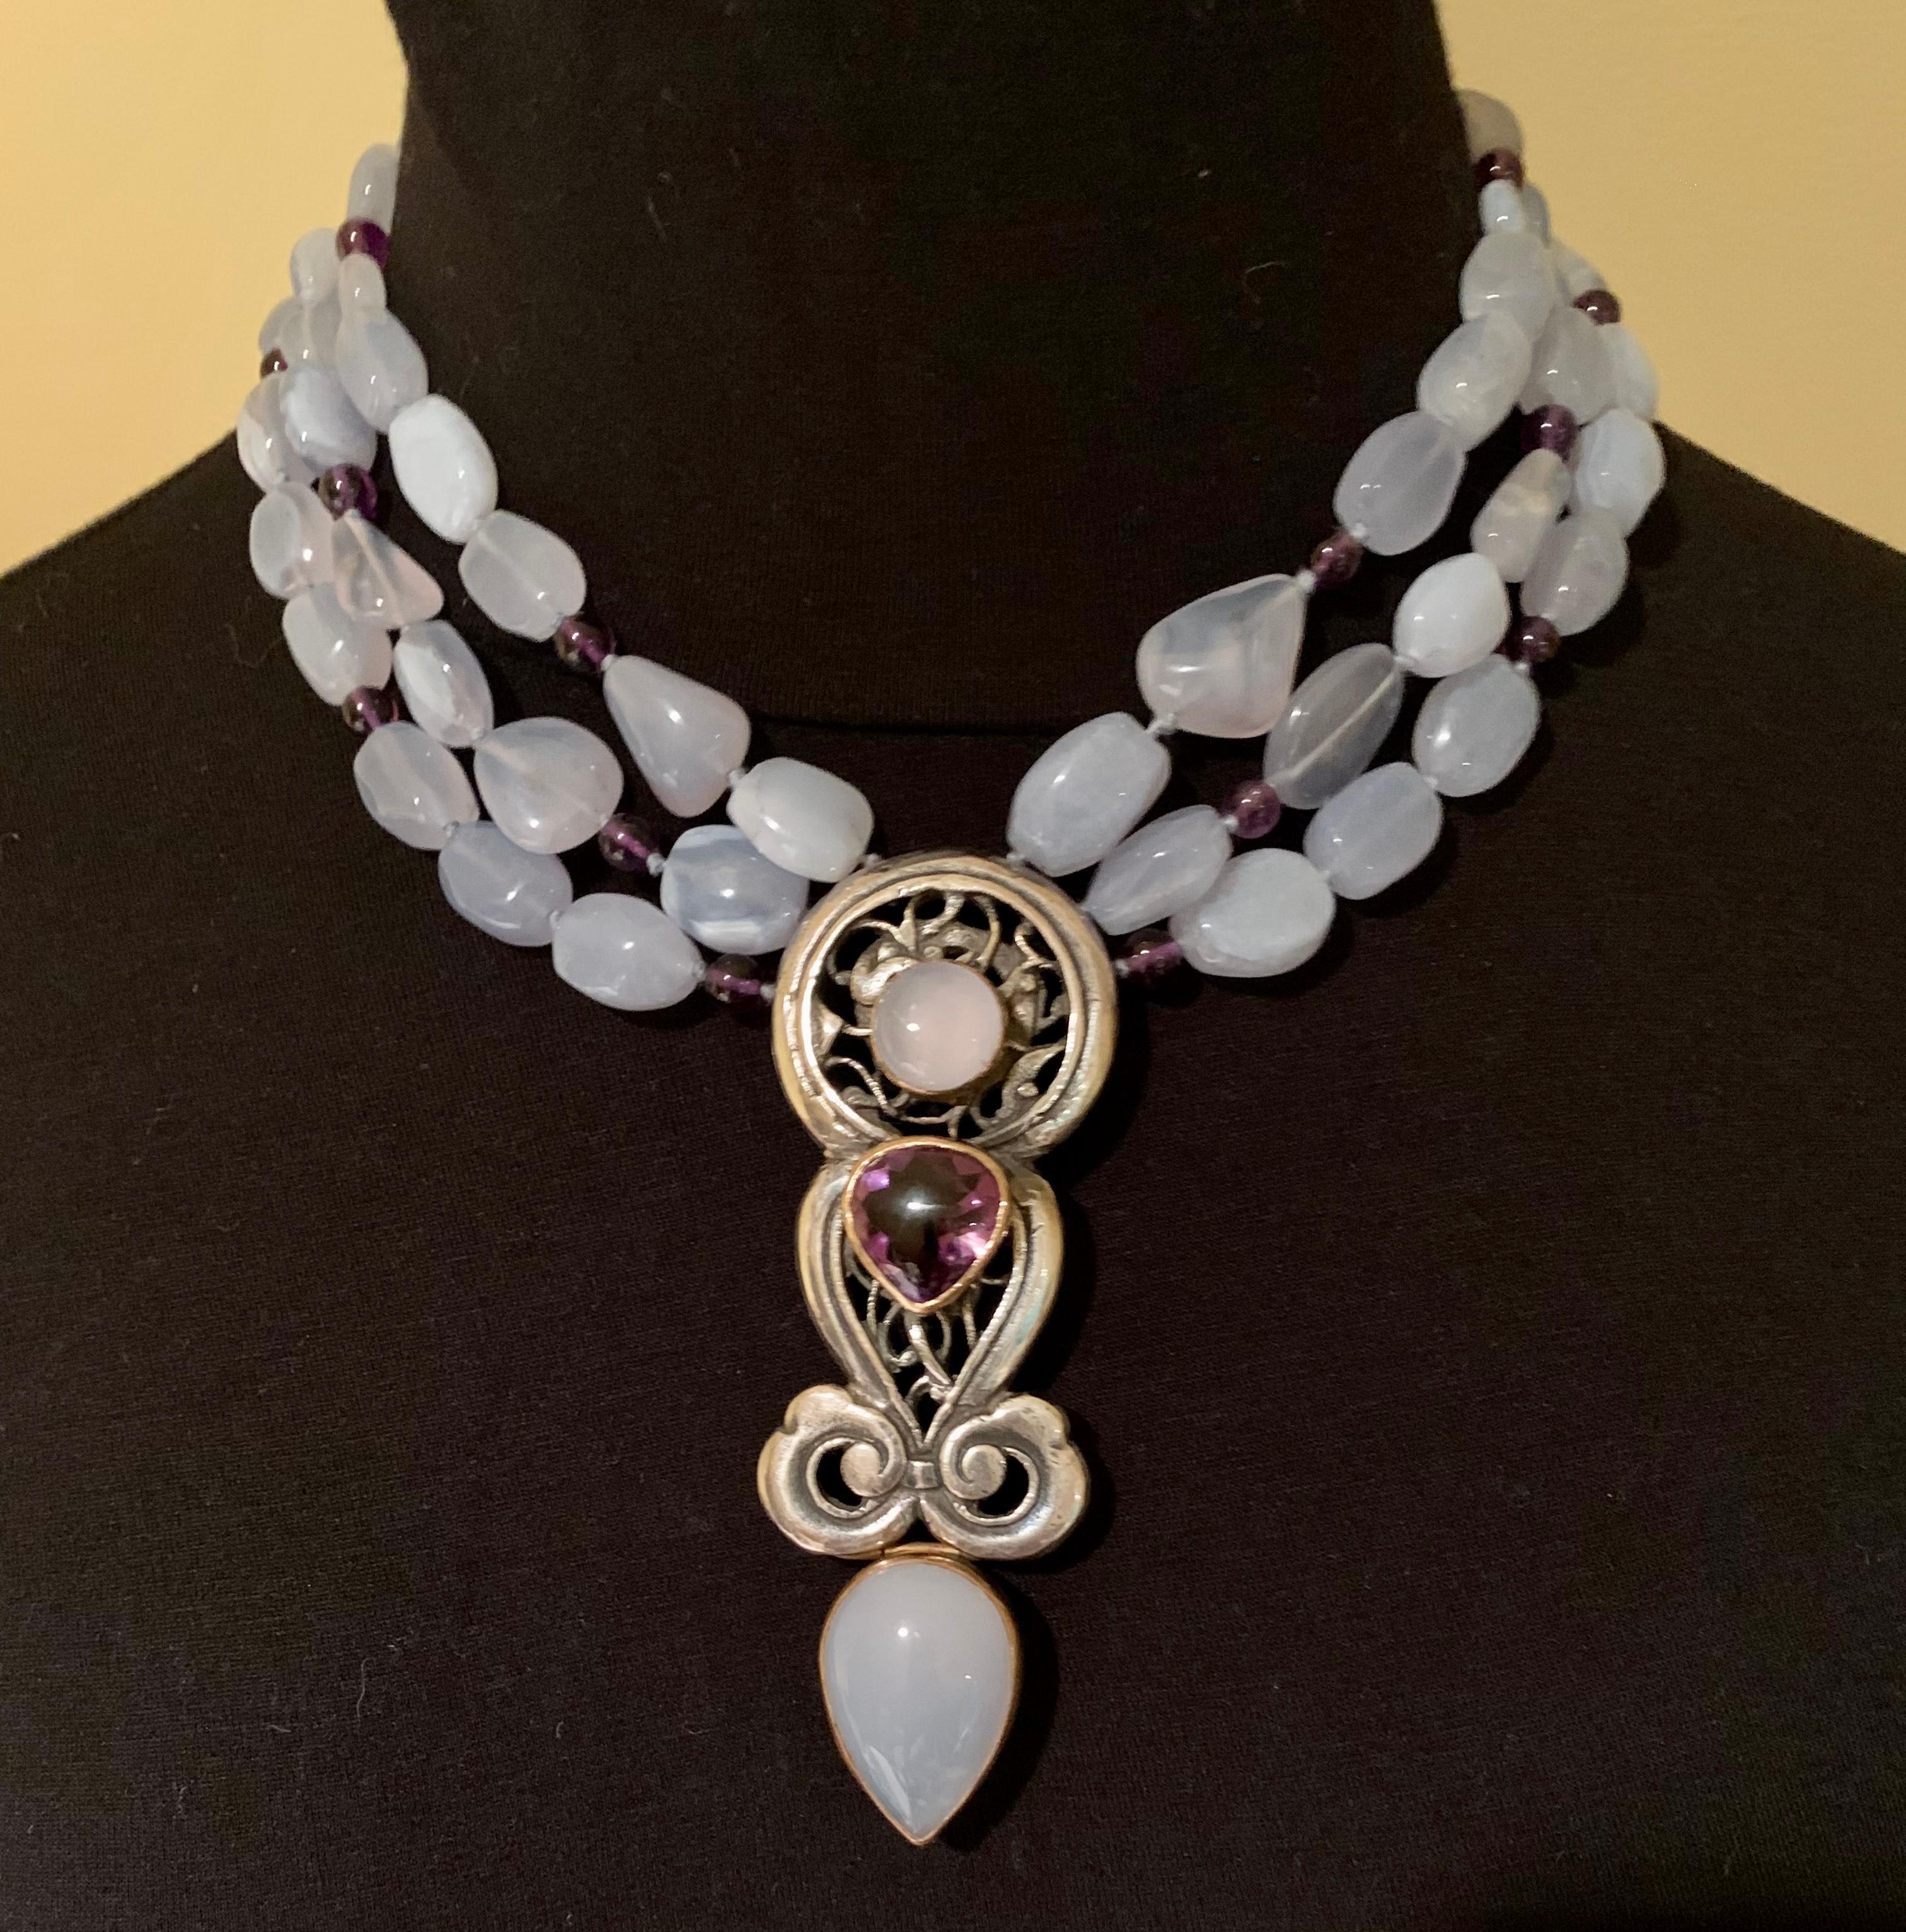 Eileen Coyne necklaces have graced the necks of stylish women such as Princess Ira von Furstenberg, Shirley Conran and Princess Michael of Kent. Often one of a kind, each jewel is designed by the artist. This stunning blue calcedony, amethyst, 22K